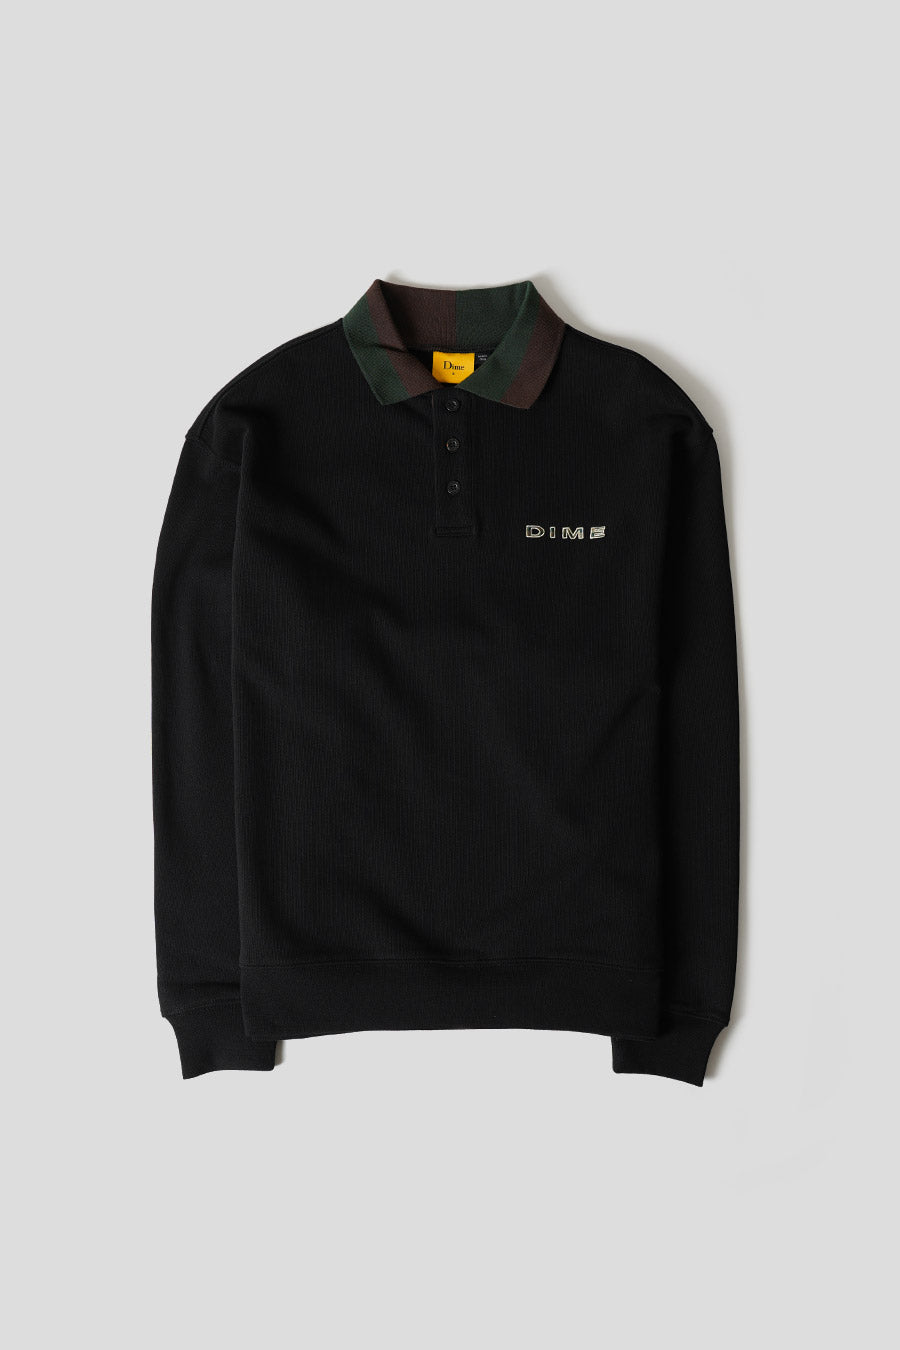 Dime - BLACK TERRY RUGBY LONG-SLEEVED POLO SHIRT - LE LABO STORE